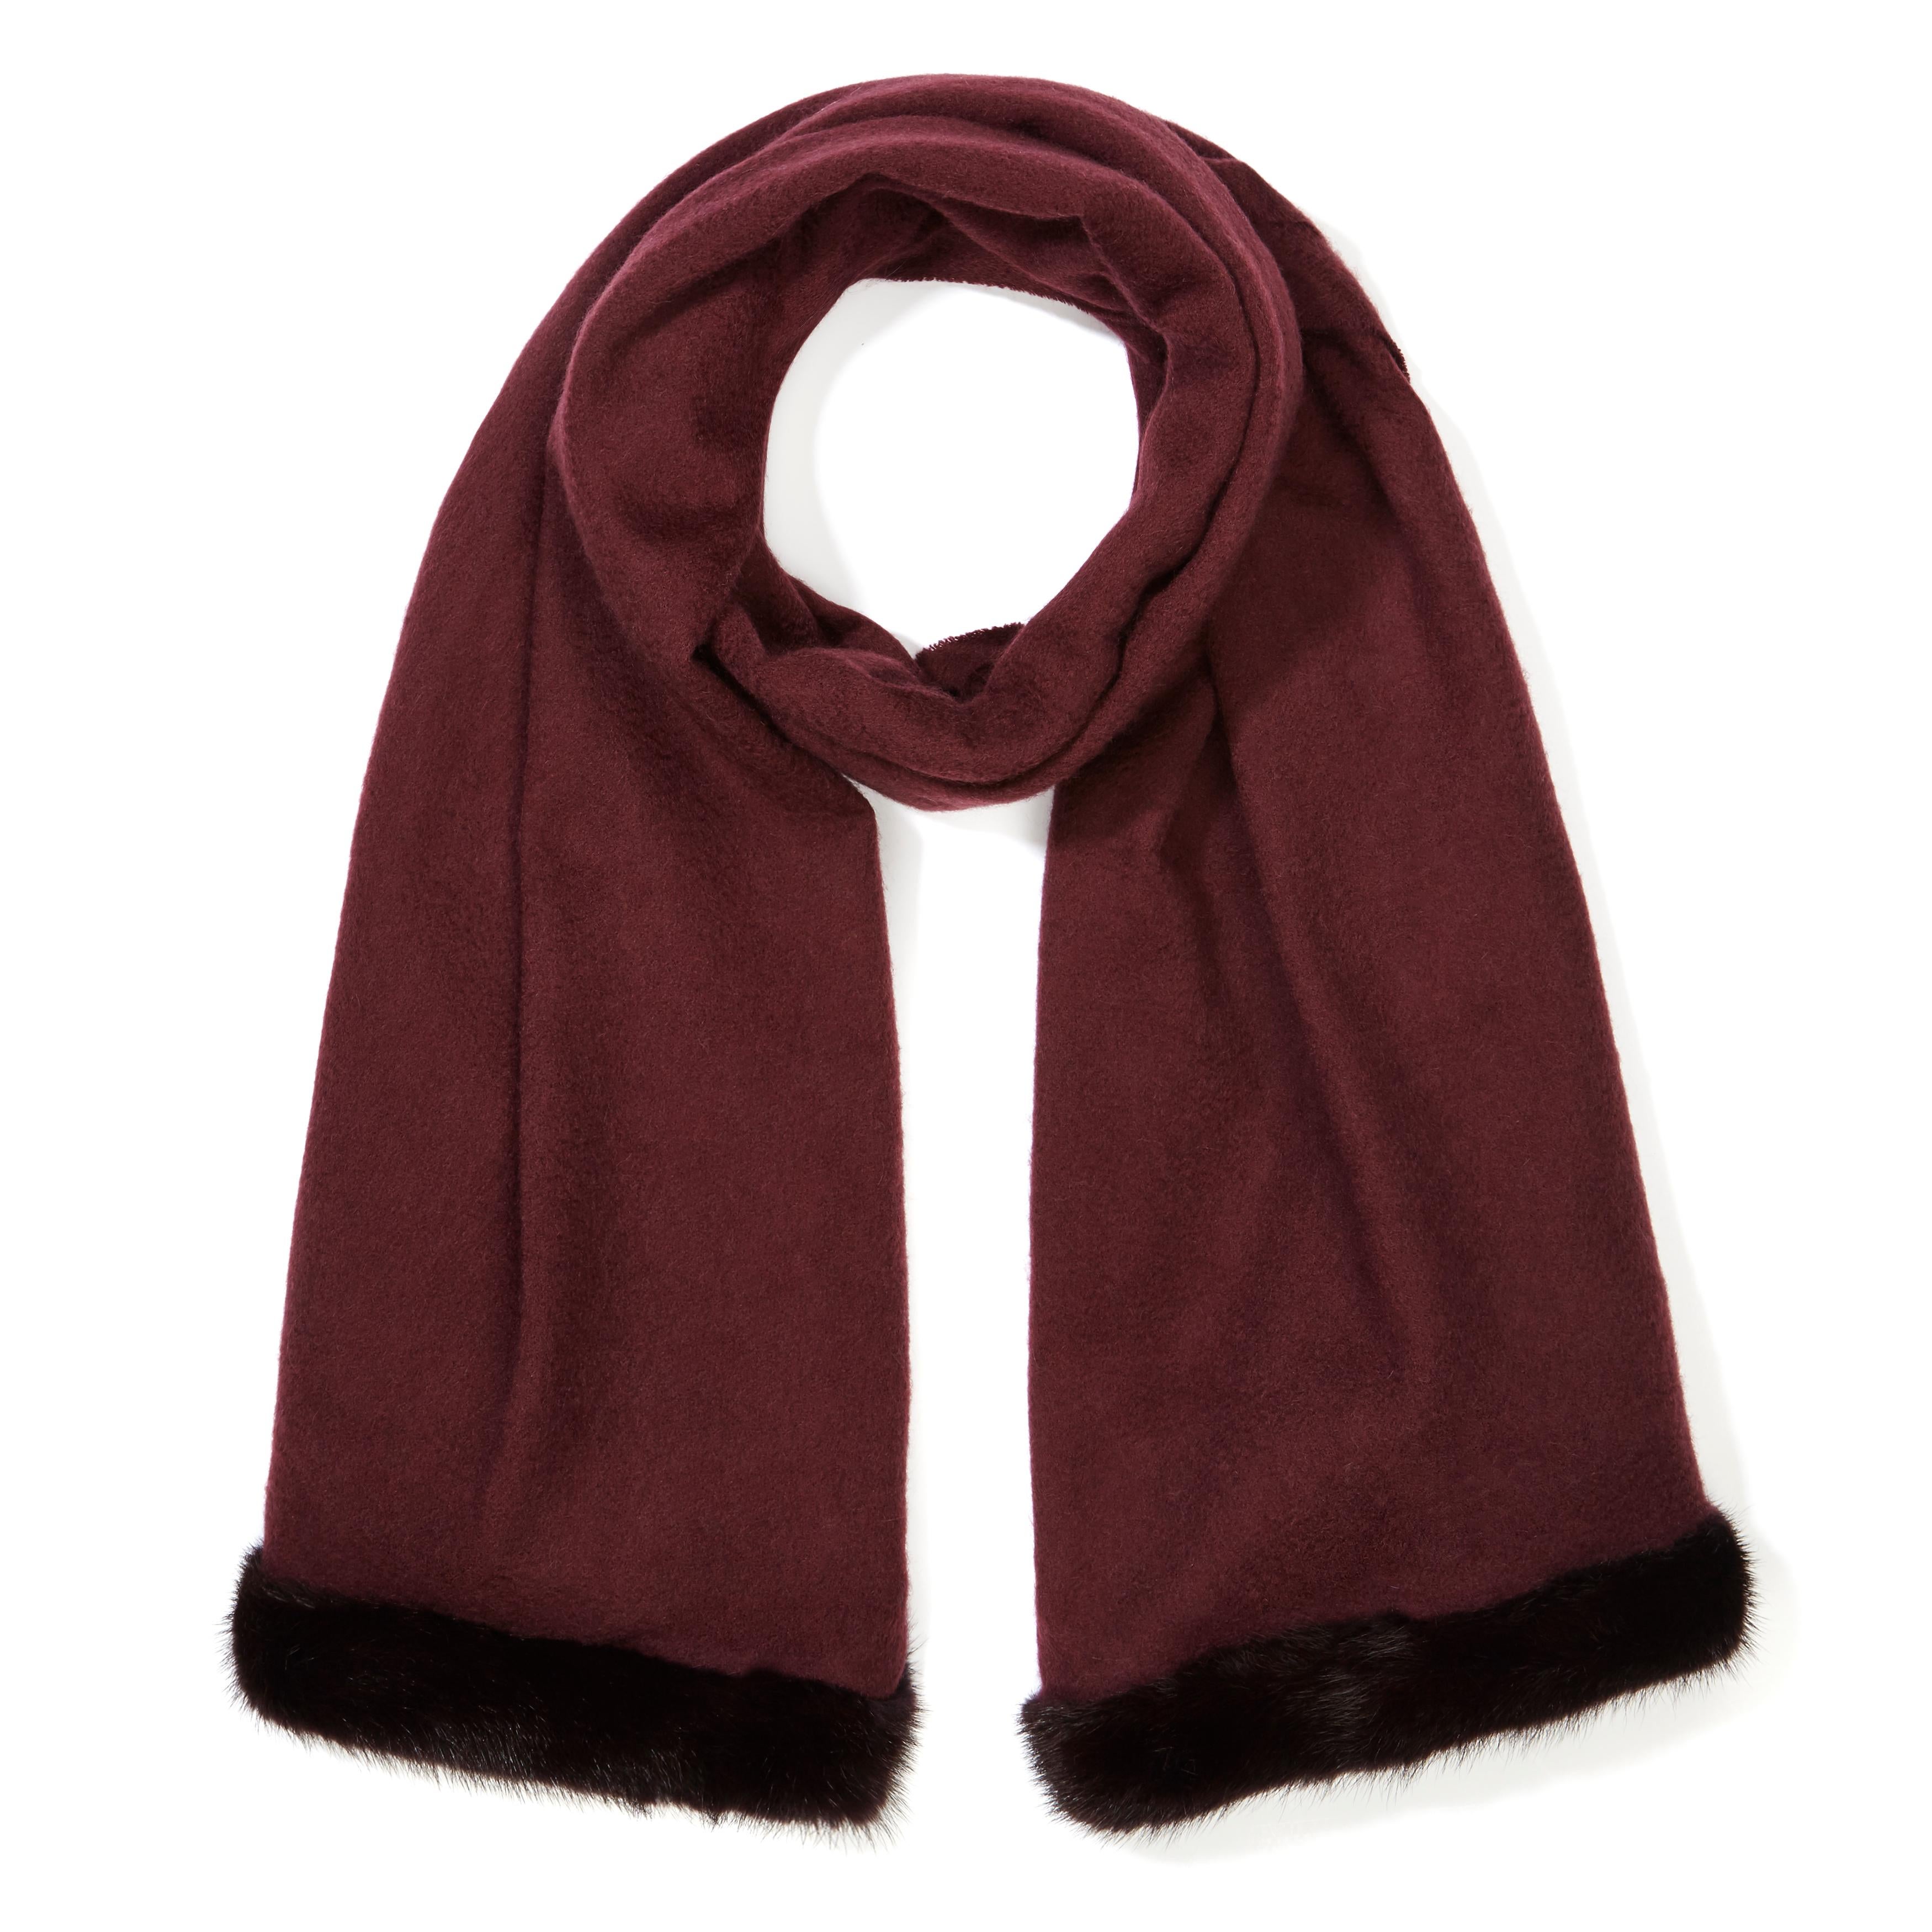 Verheyen London Mink Fur Trimmed Cashmere Shawl Scarf in Rich Burgundy Gift 

Verheyen London’s shawl is spun from the finest Scottish woven cashmere and finished with the most exquisite dyed mink. Its warmth envelopes you with luxury, perfect for